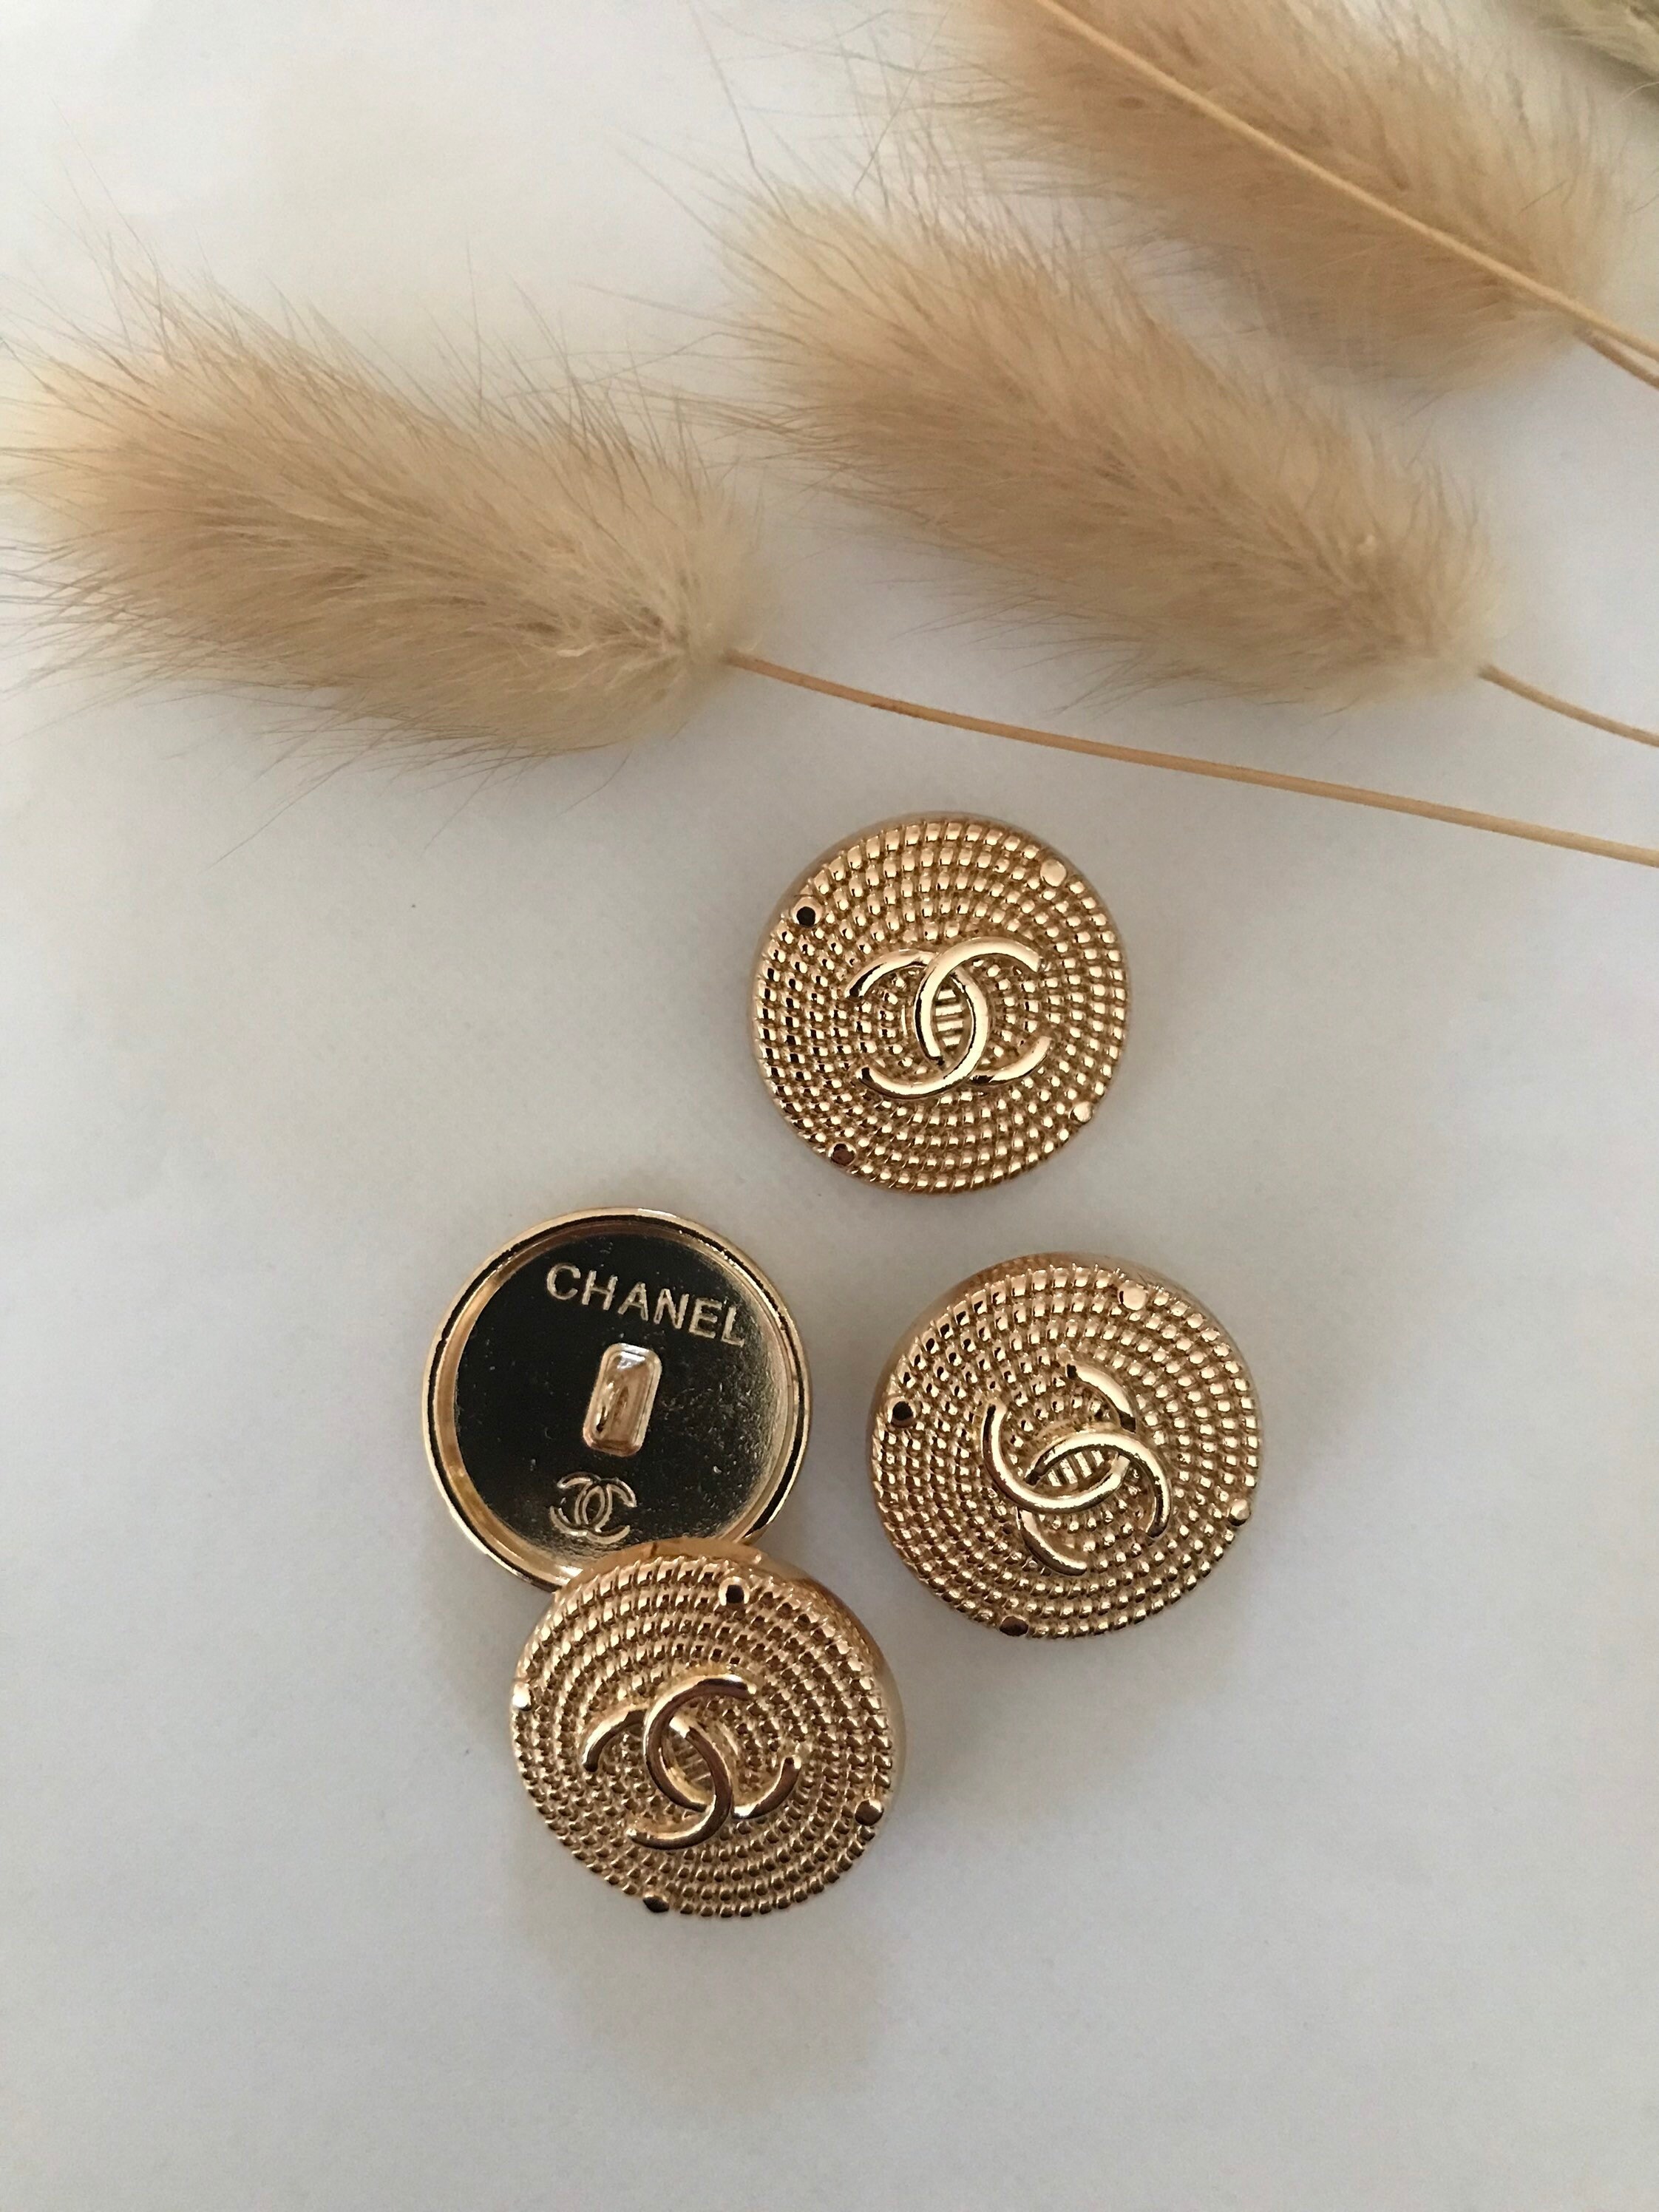 Chanel Buttons - Etsy